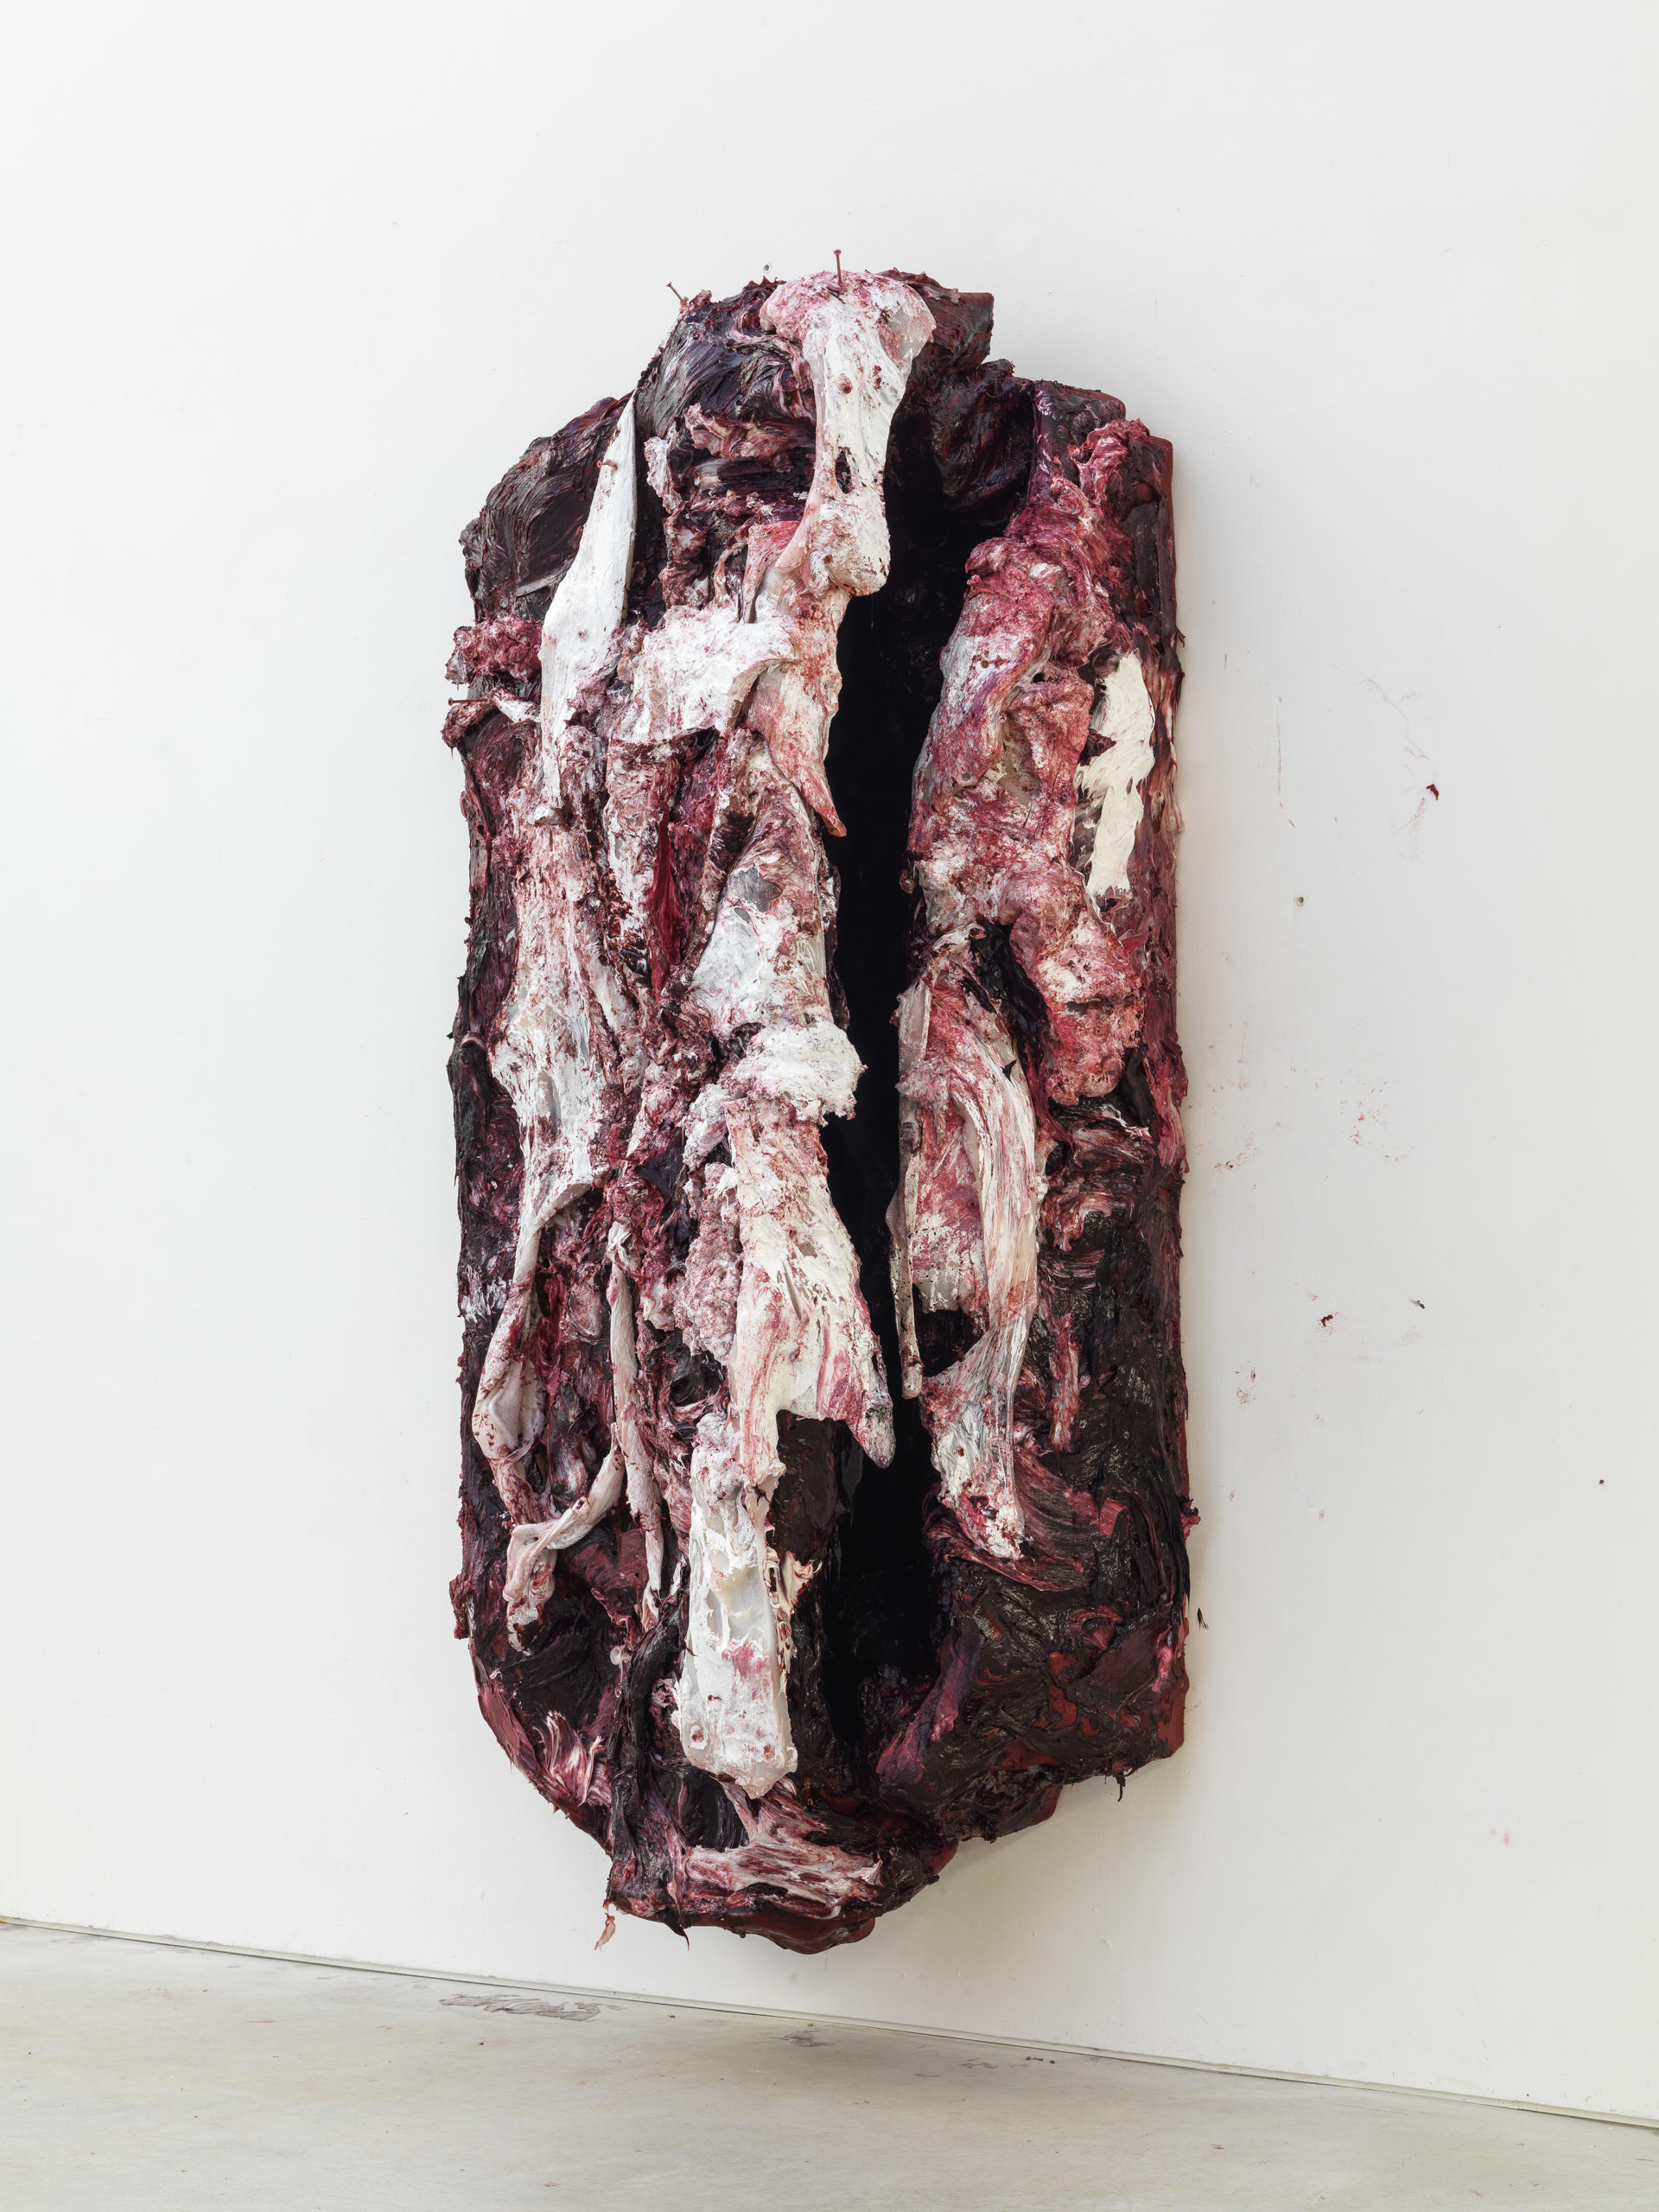 Anish KapoorThree Days of Mourning
2016
silicone, tecnica mista, vernice cm250×120×70
Photograph: Dave Morgan
©Anish Kapoor. All Rights Reserved SIAE, 2023